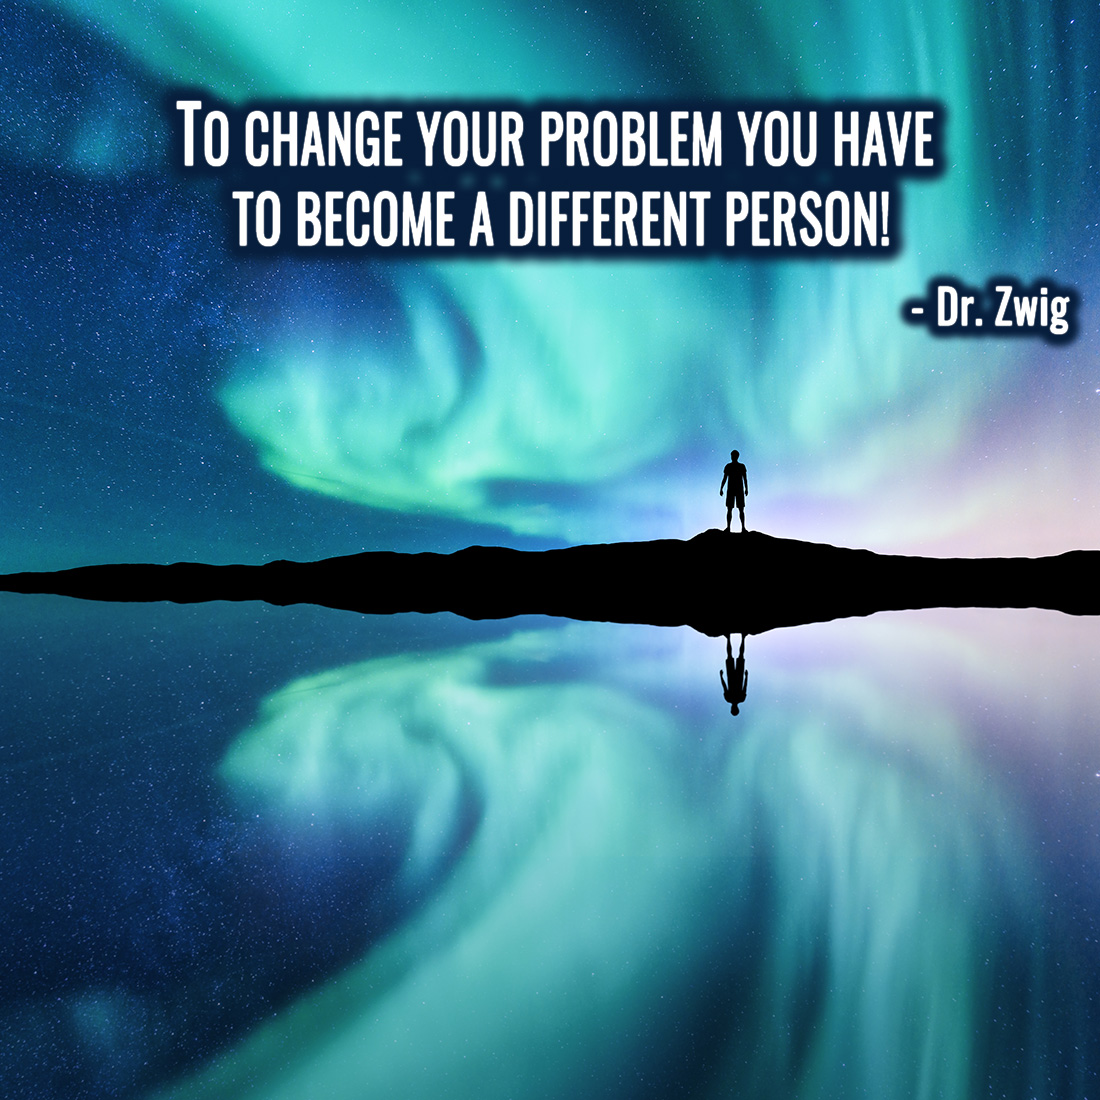 To change your problem you have to become a different person!